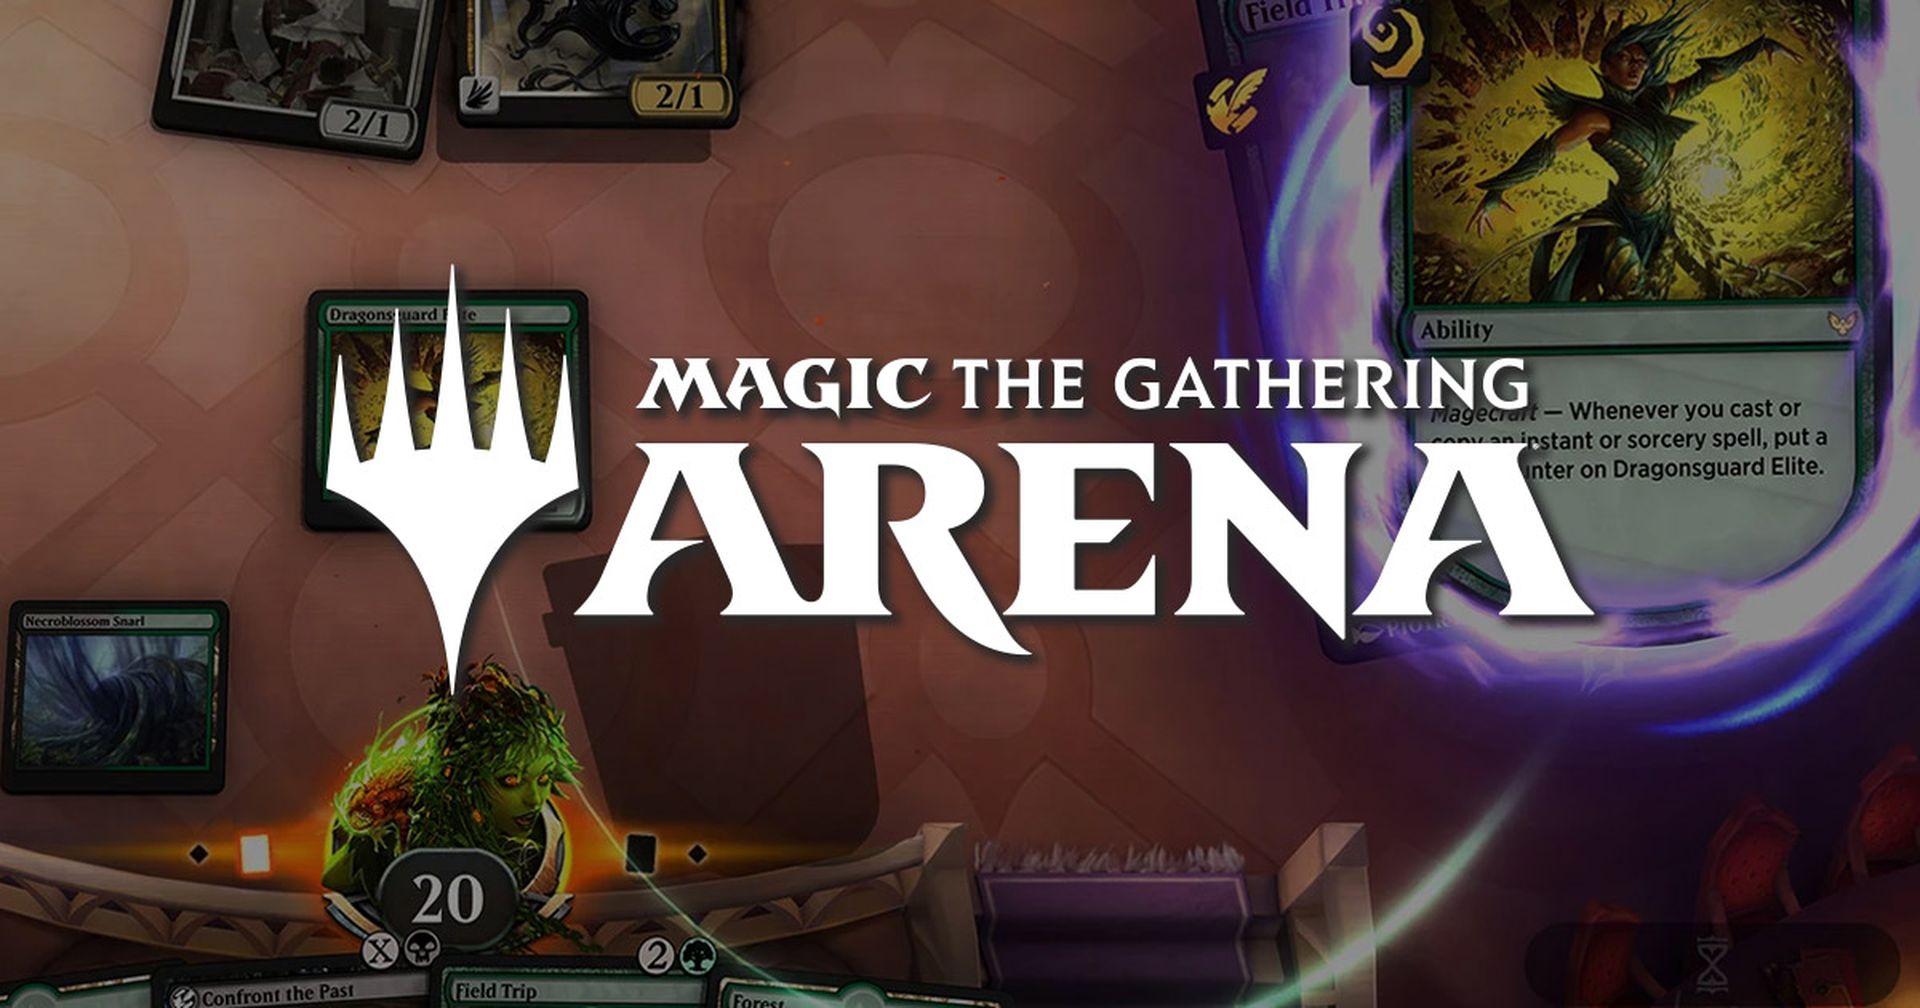 MTG arena codes: How to redeem them (September 2022)?